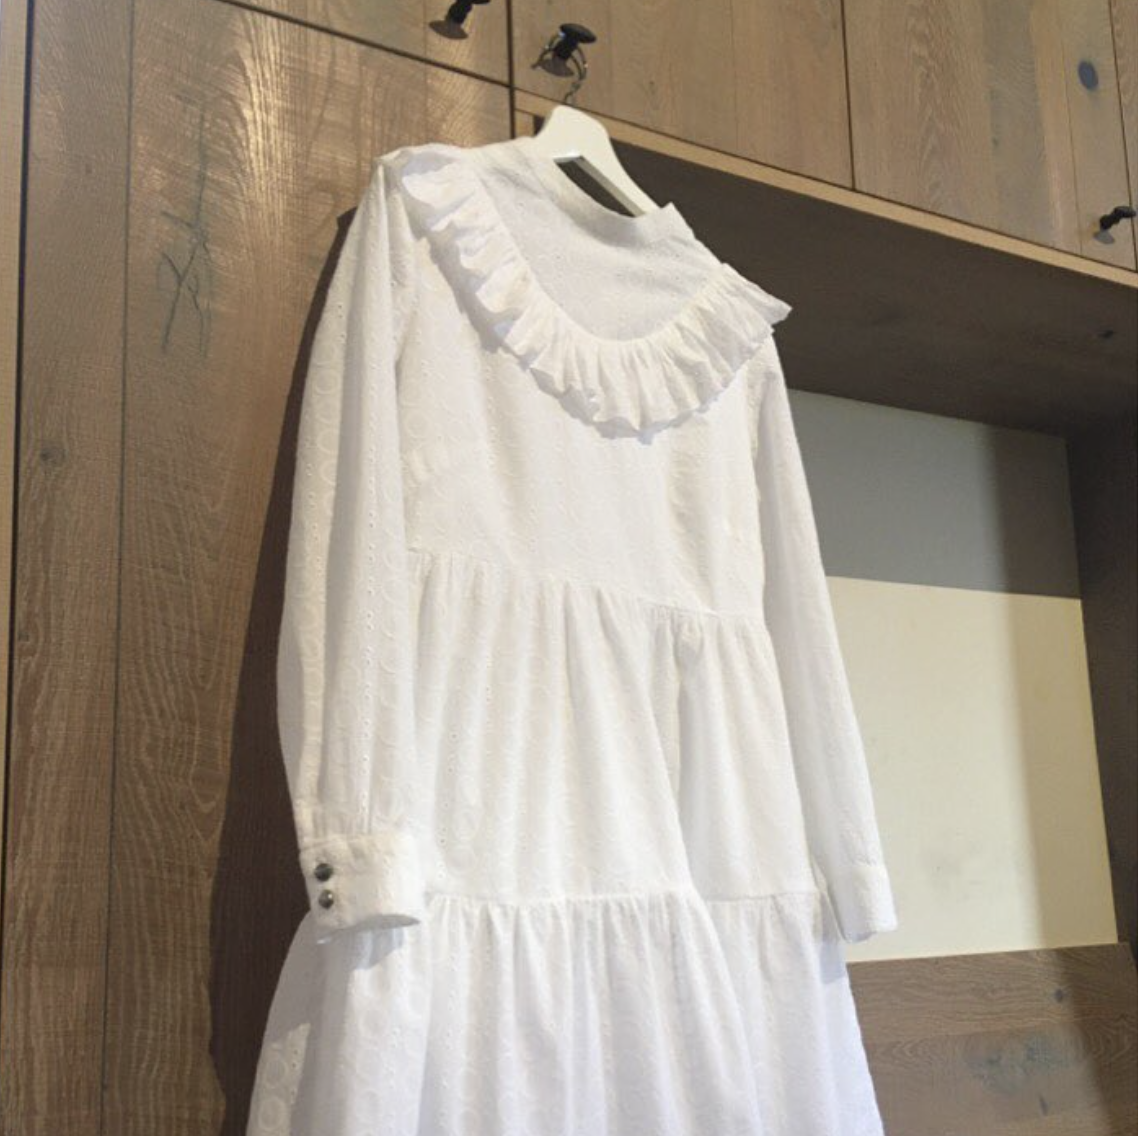 The Leo babydoll dress pattern is shown here in a white coton lawn that showcases the babydoll cut